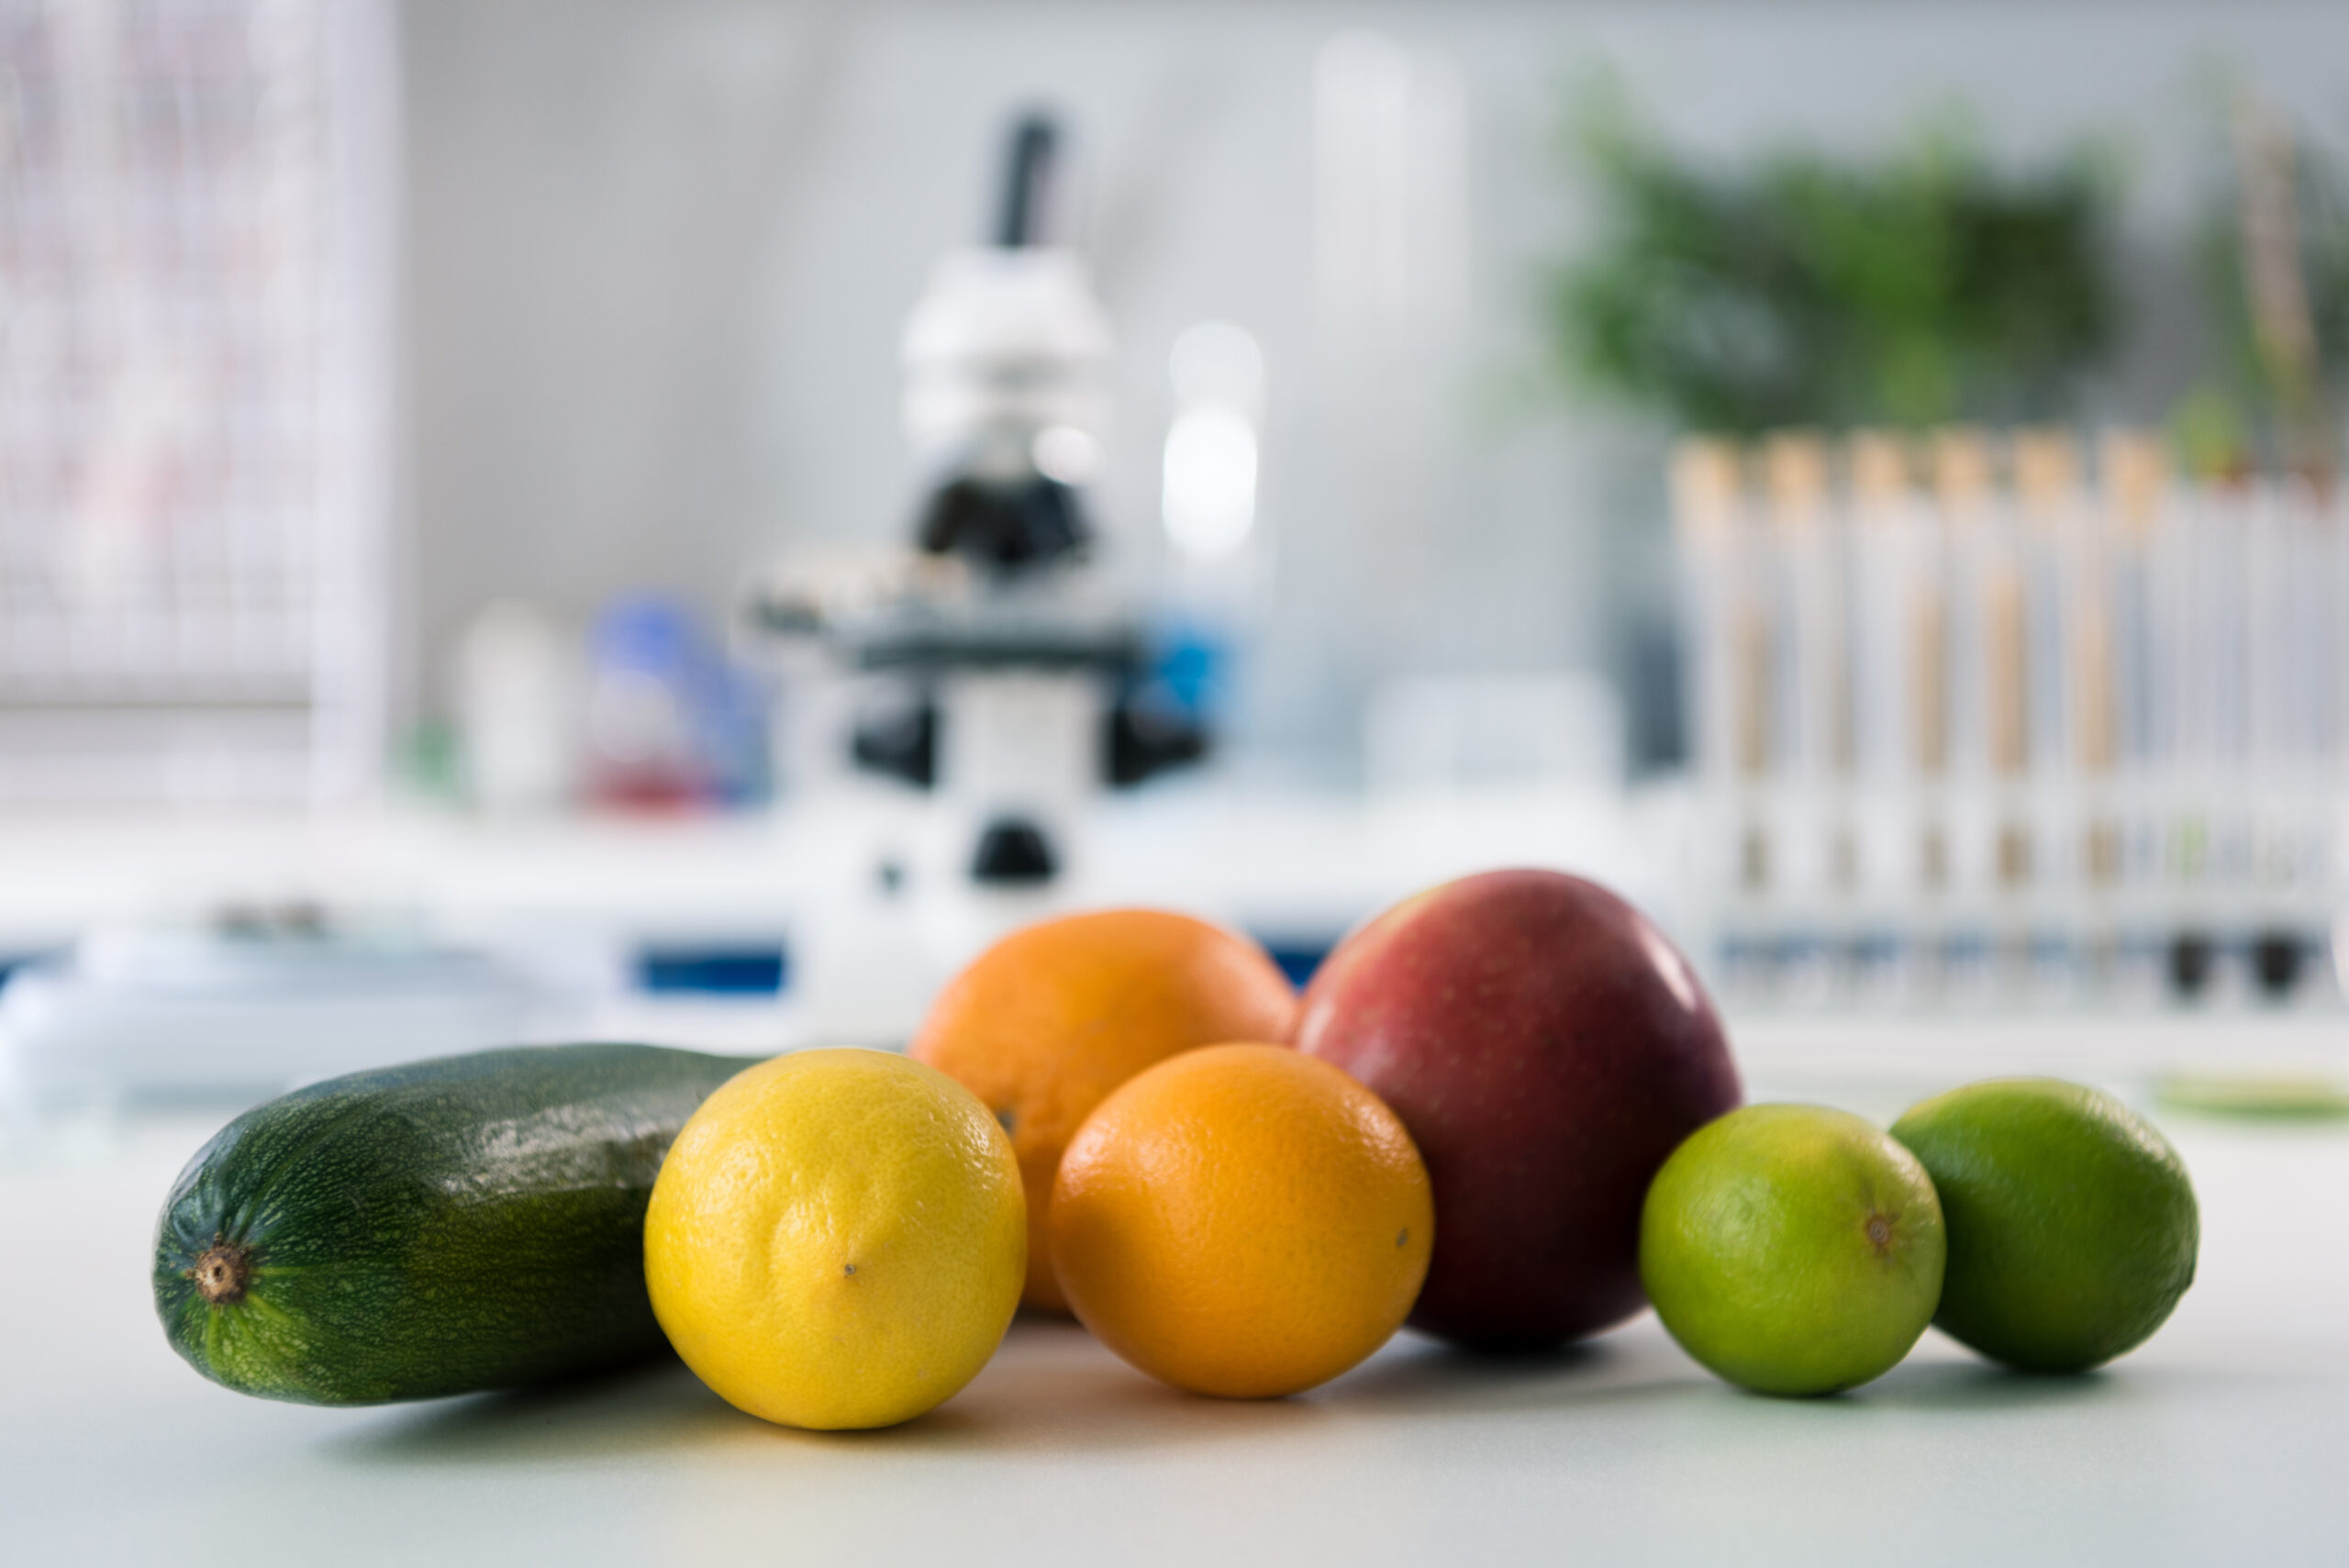 Scientific tools and fruits at workplace in modern biological laboratory